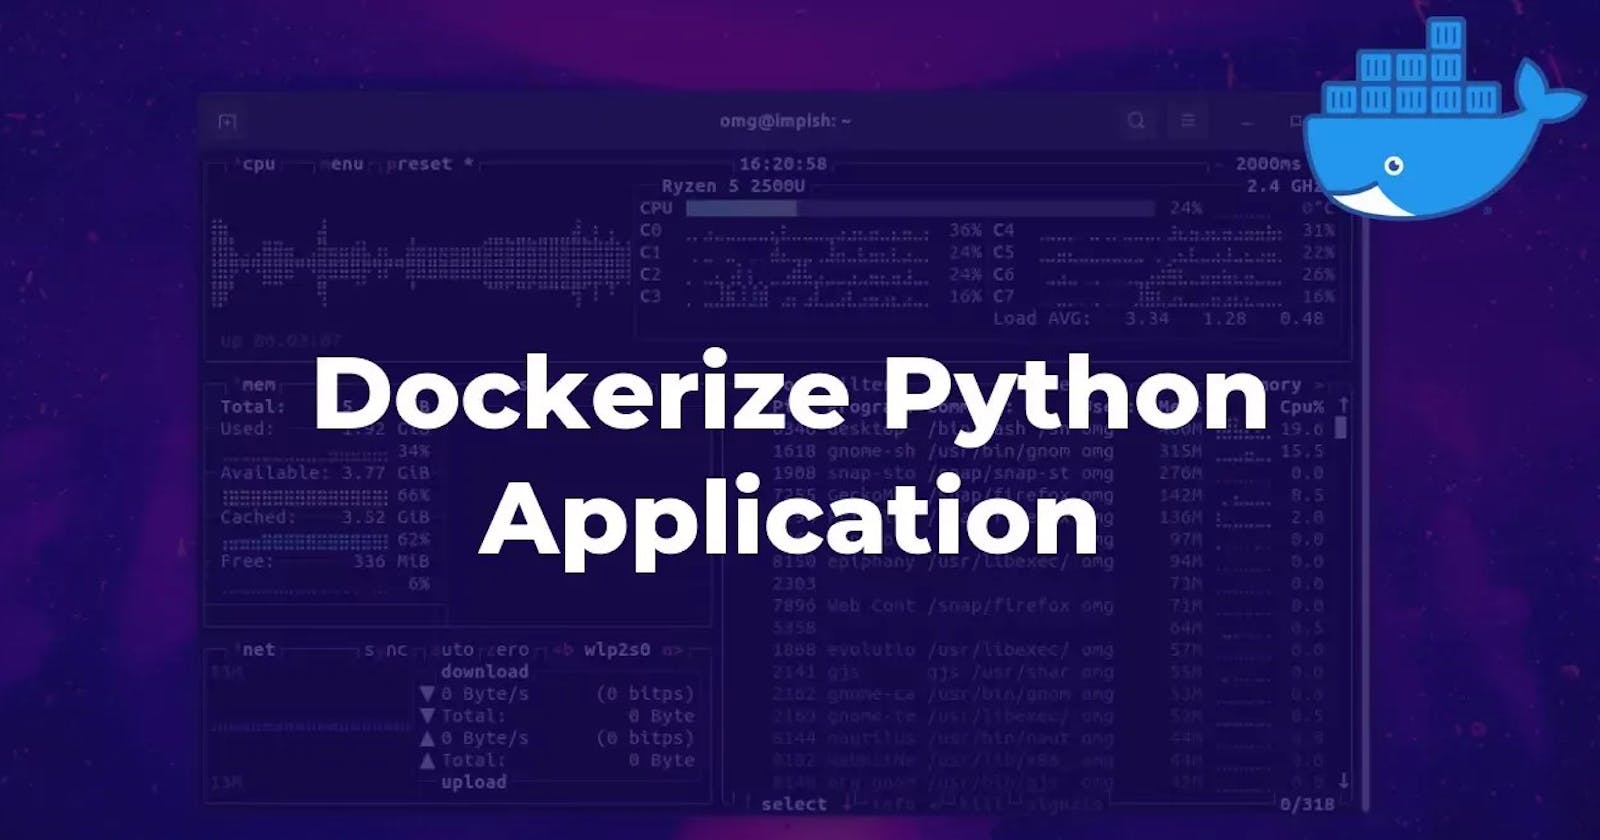 Dockerfile for a Python application